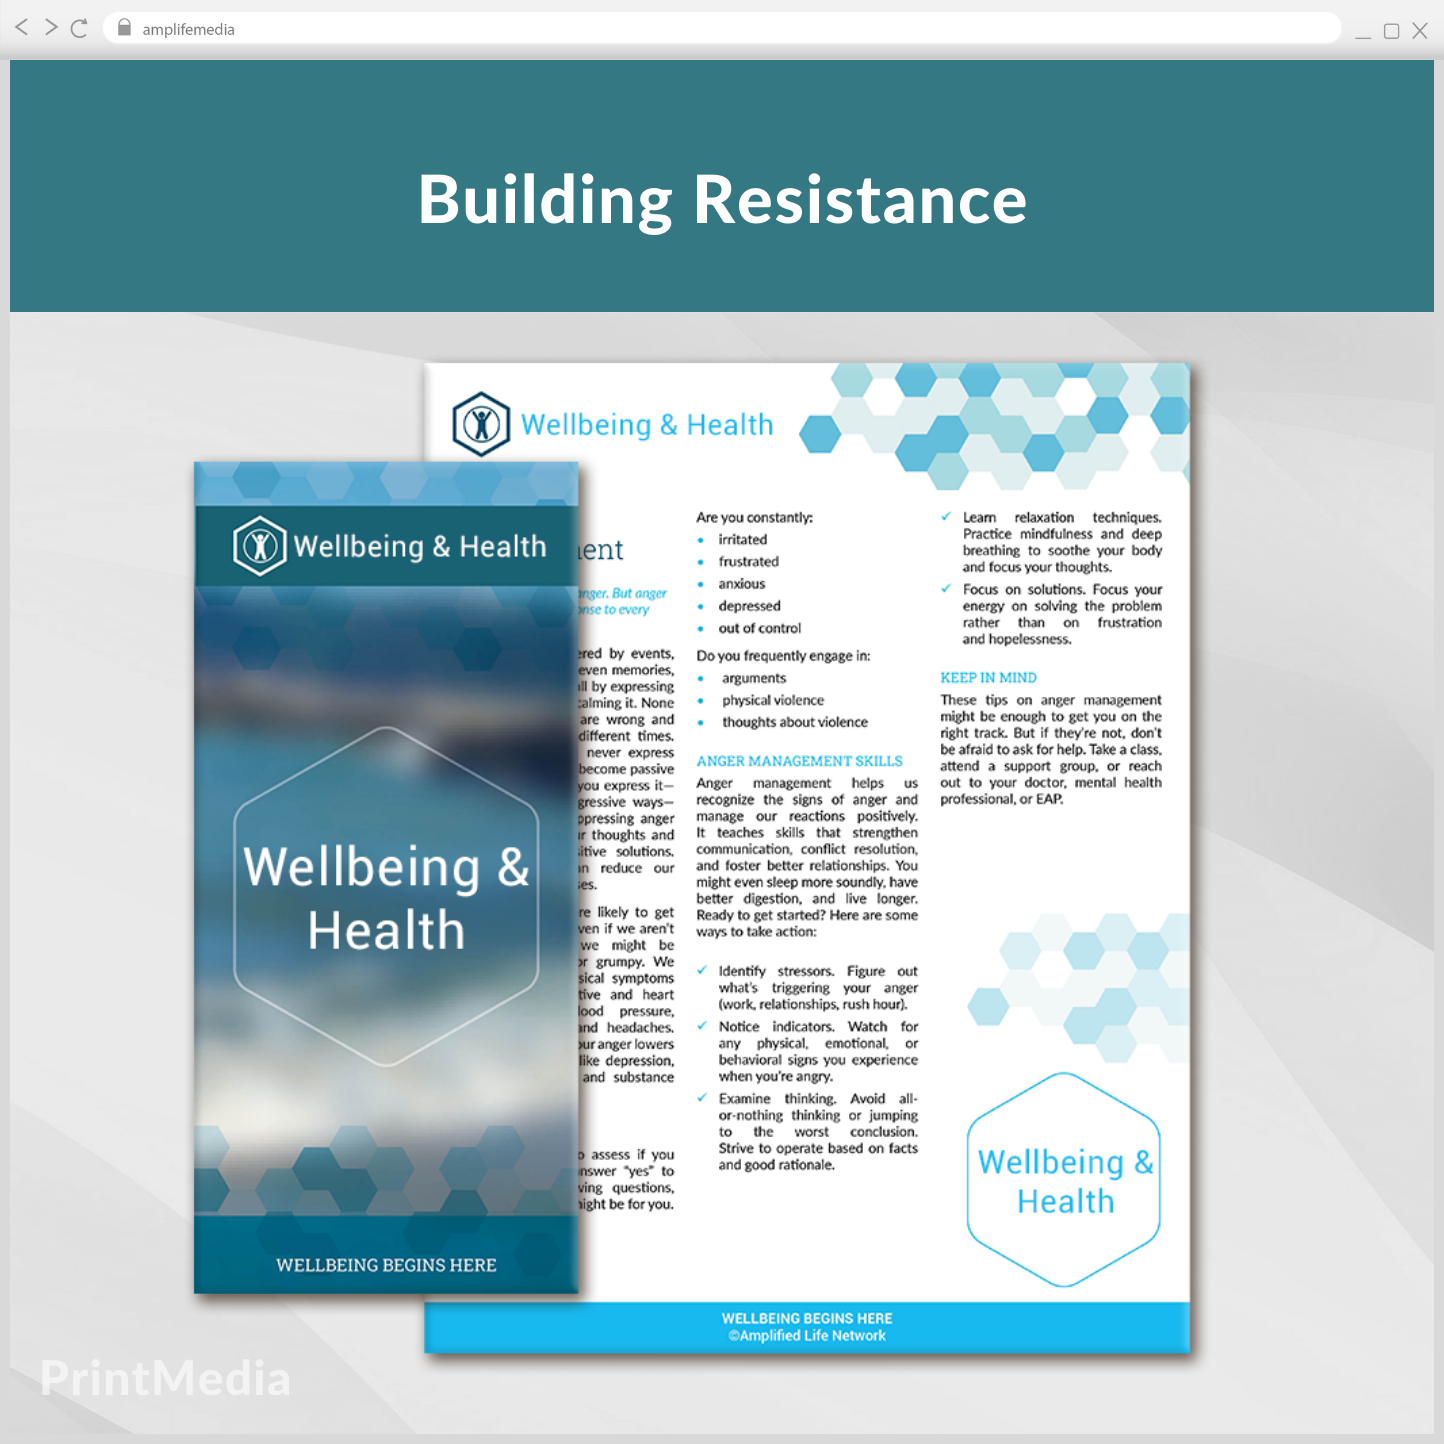 Subscription to Wellbeing Media: Building Resilience PrintMedia 1122